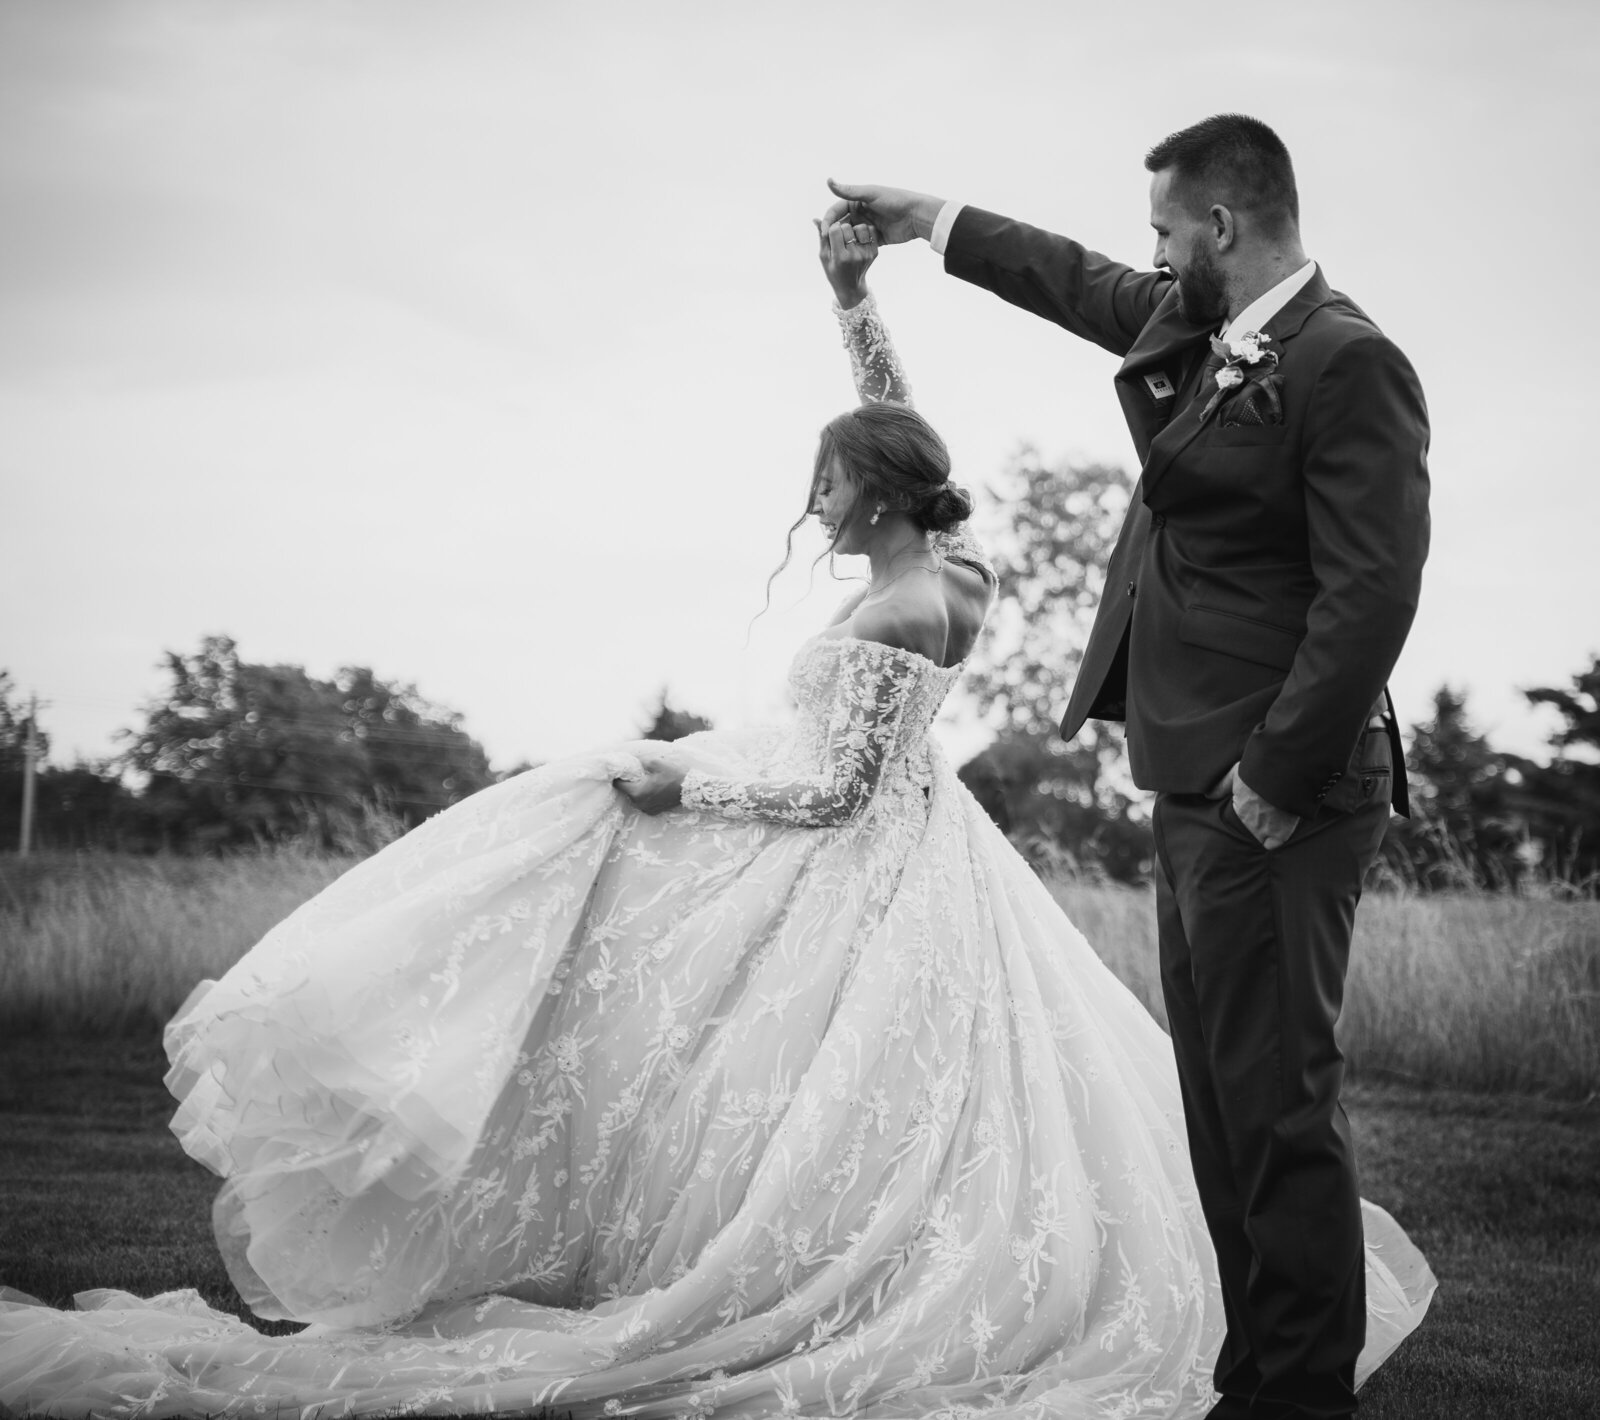 Ryan Bee spins his new wife, Mahalie, in her beautiful lace ballgown in front of a field at The Old Blue Rooster Event Center LLC in Lithopolis, Ohio.